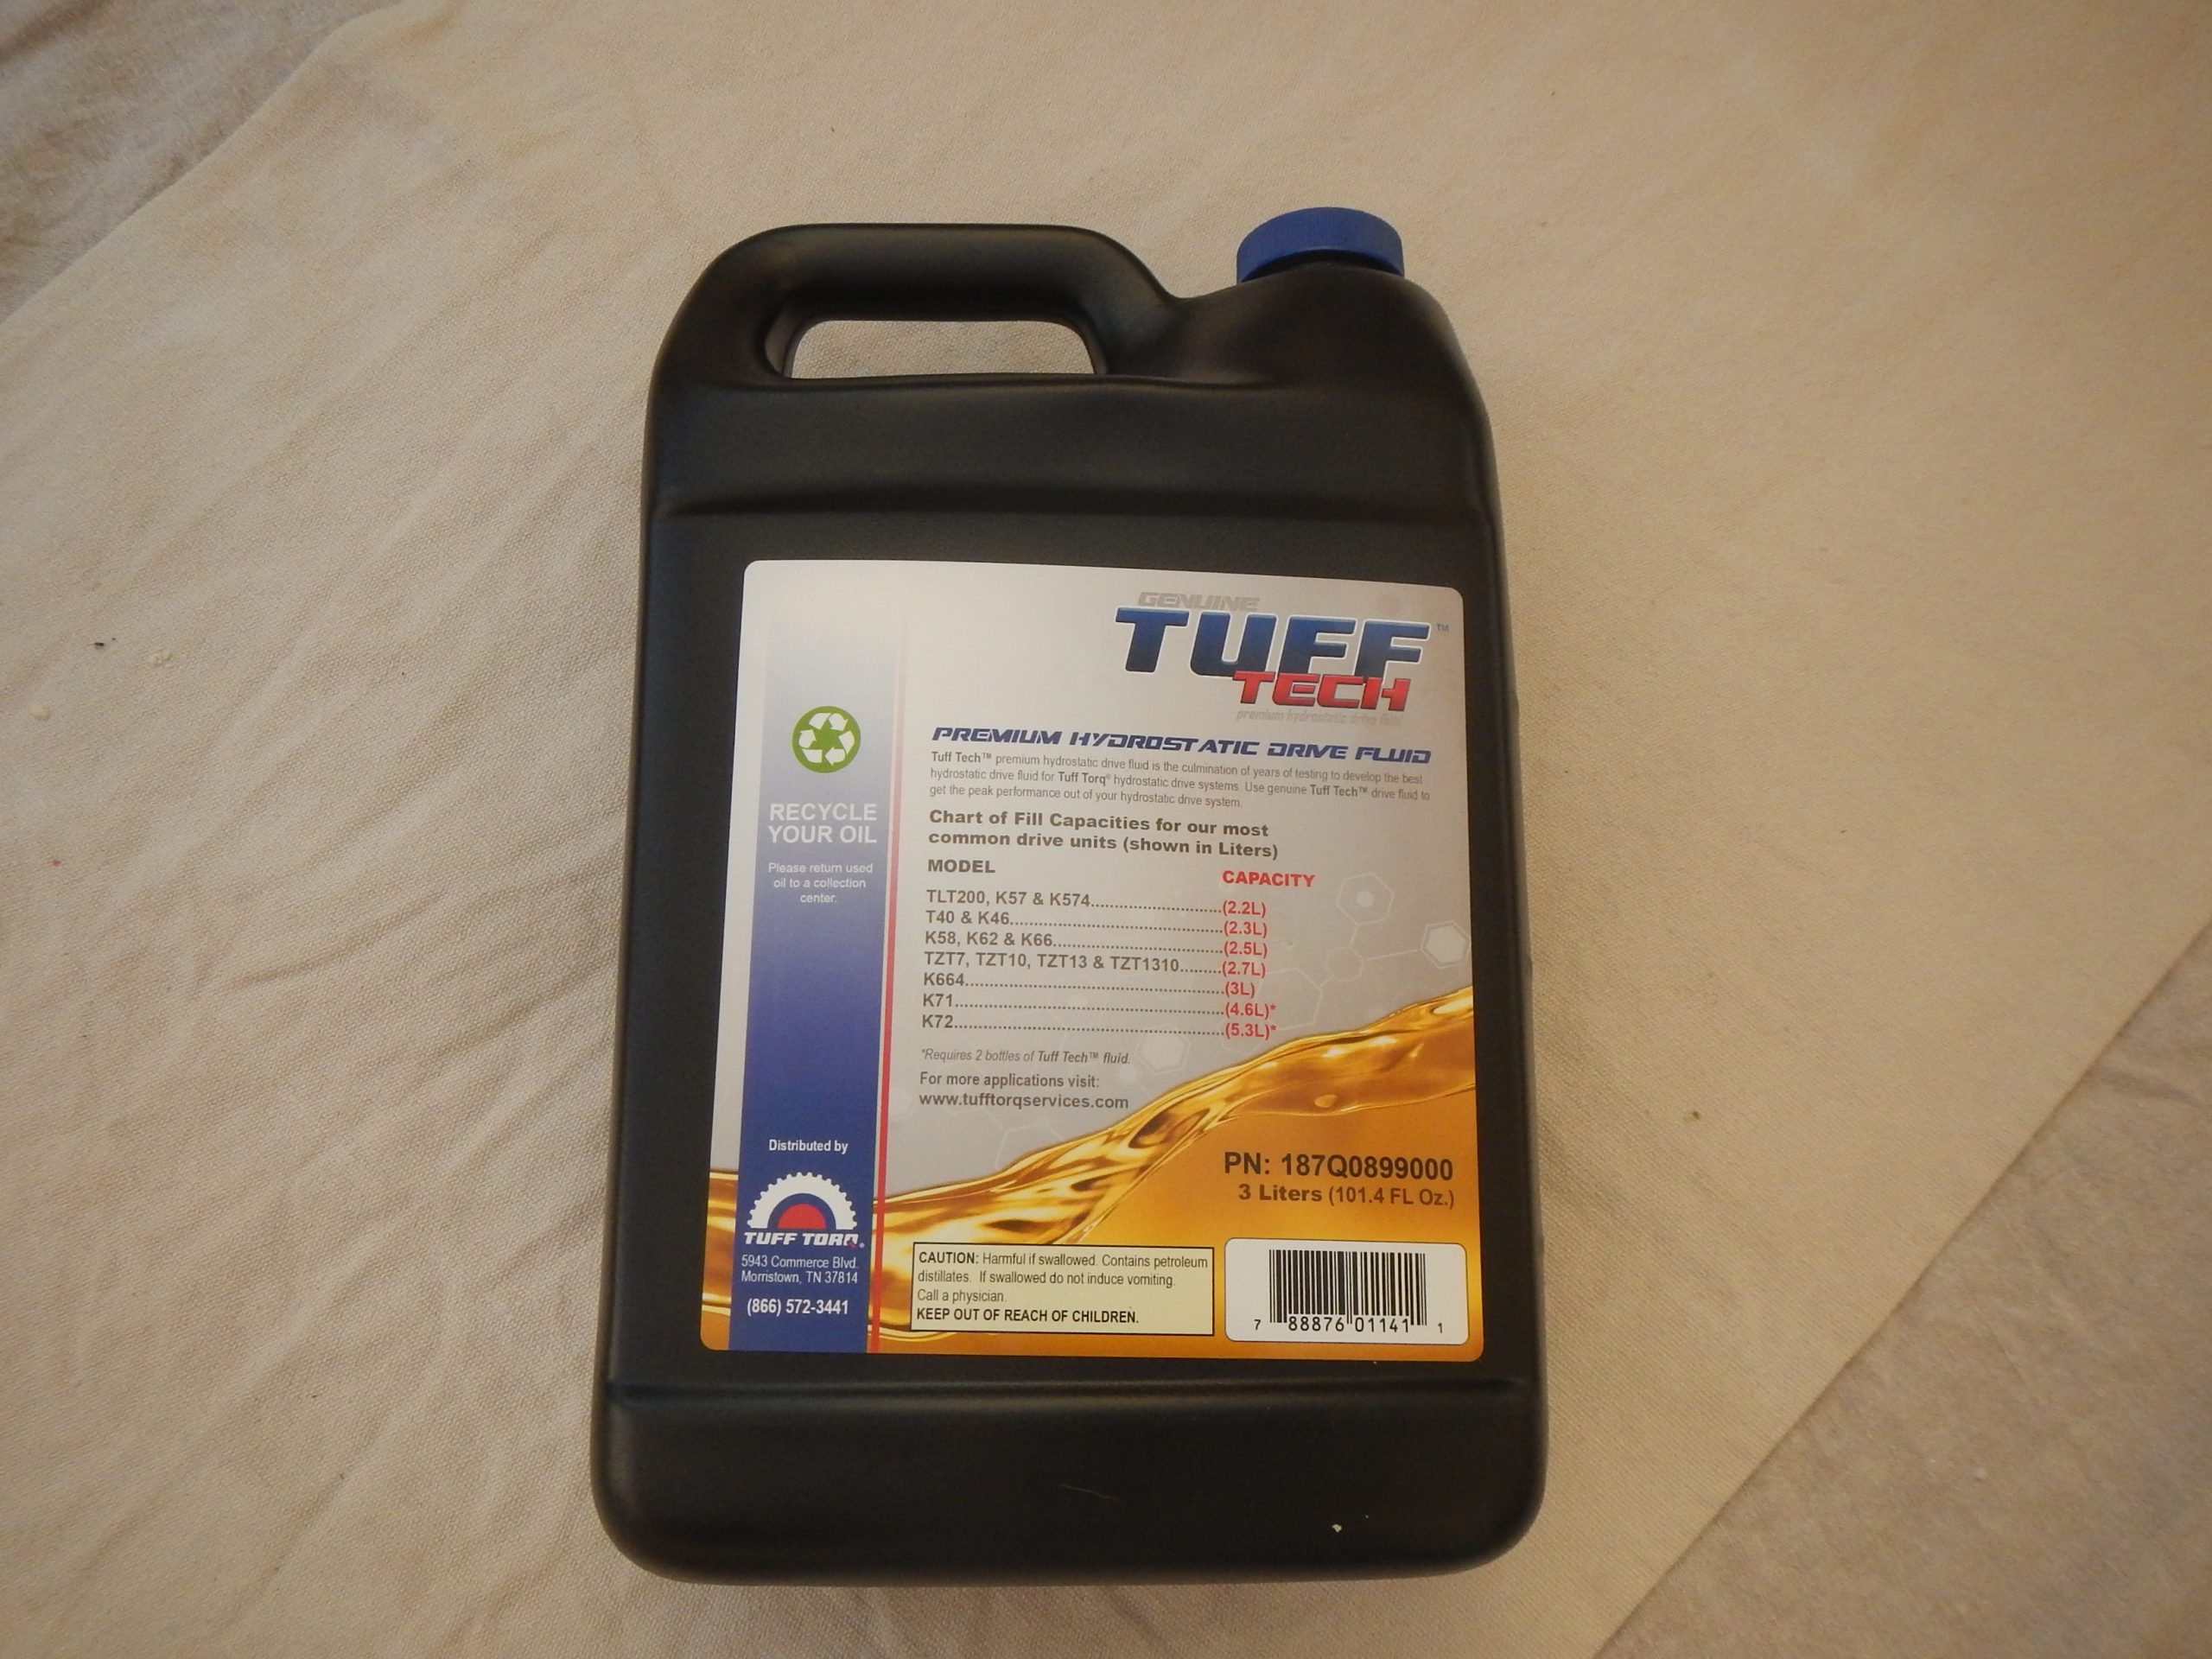 Tuff Torq Hydrostatic Oil/Drive - will Spares4mowers Fluid ever lawnmowers spares for litres 3 need – the All you